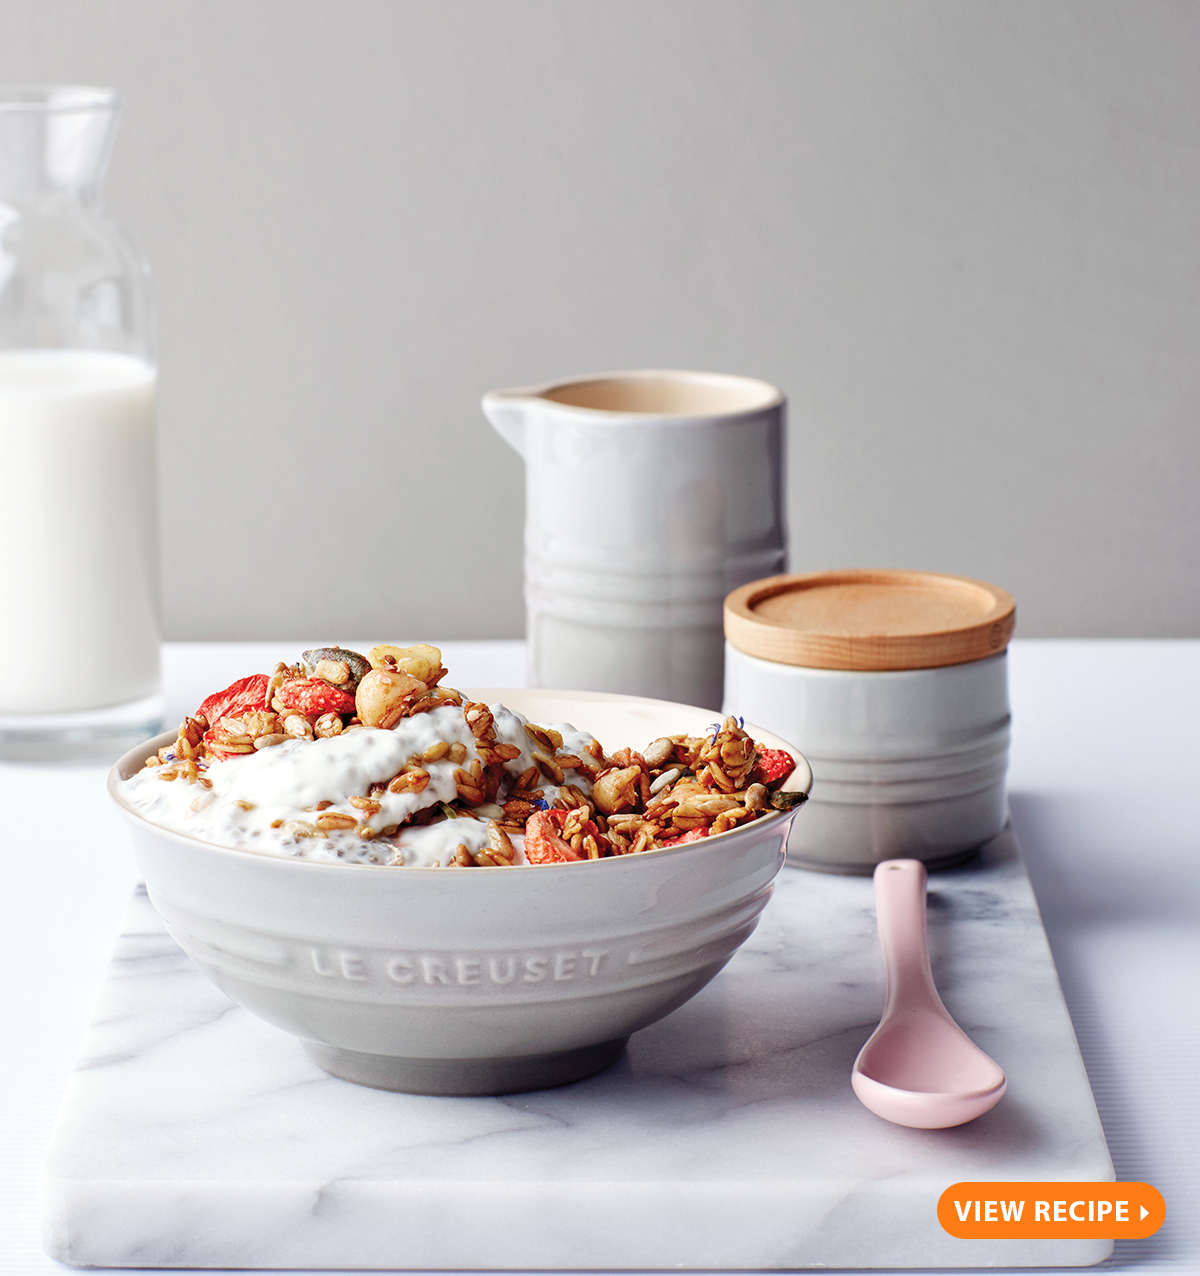 Le Creuset | Hues and Views: The Editors' Take on Mist Grey